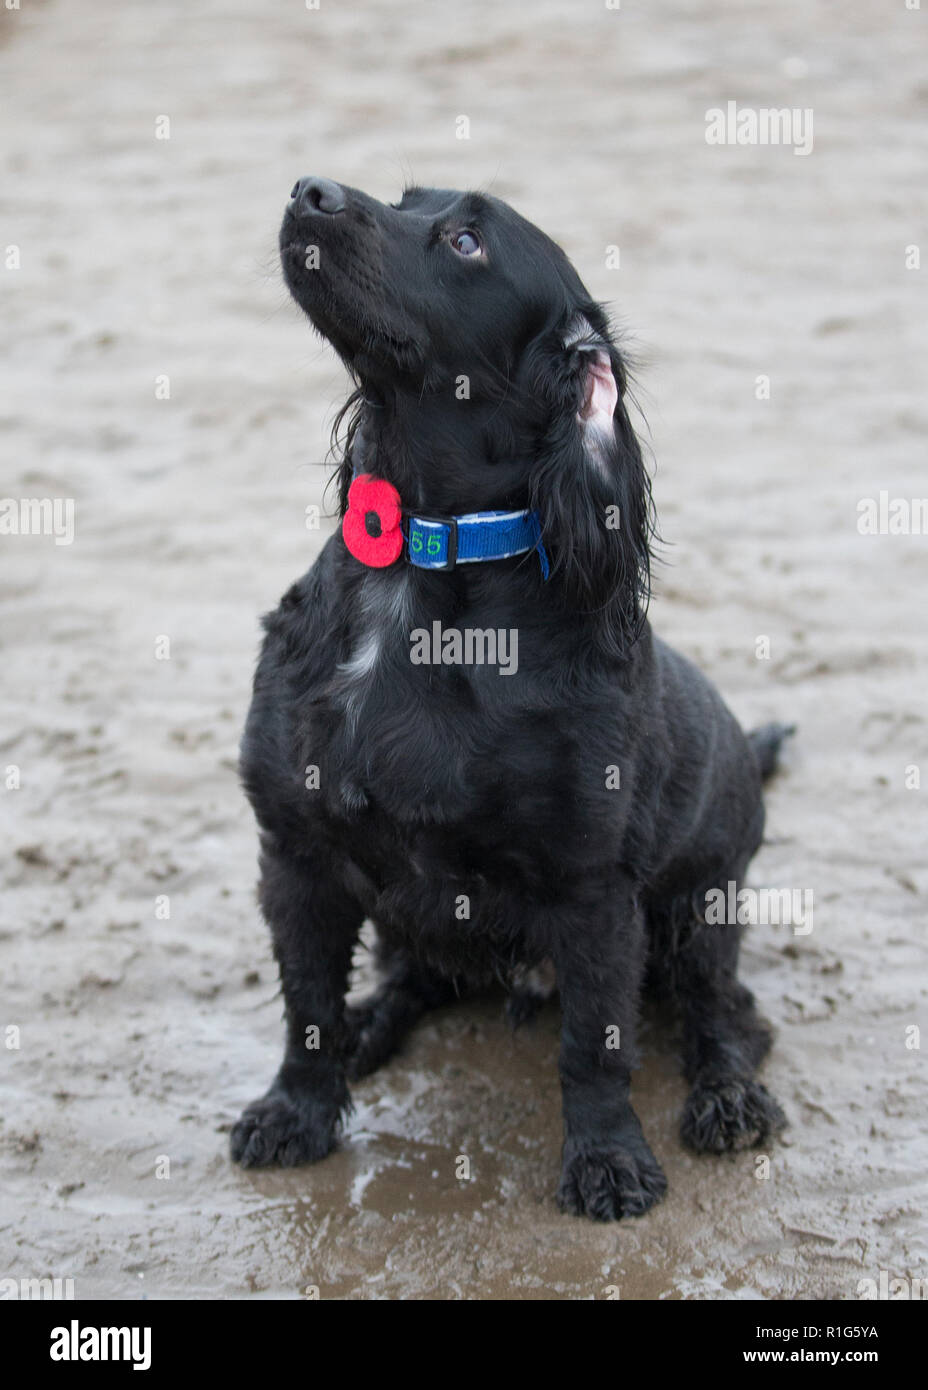 A black cocker spaniel dog wears a poppy dog collar during the Pages by the Sea project on Ayr beach in Ayrshire, Scotland Stock Photo